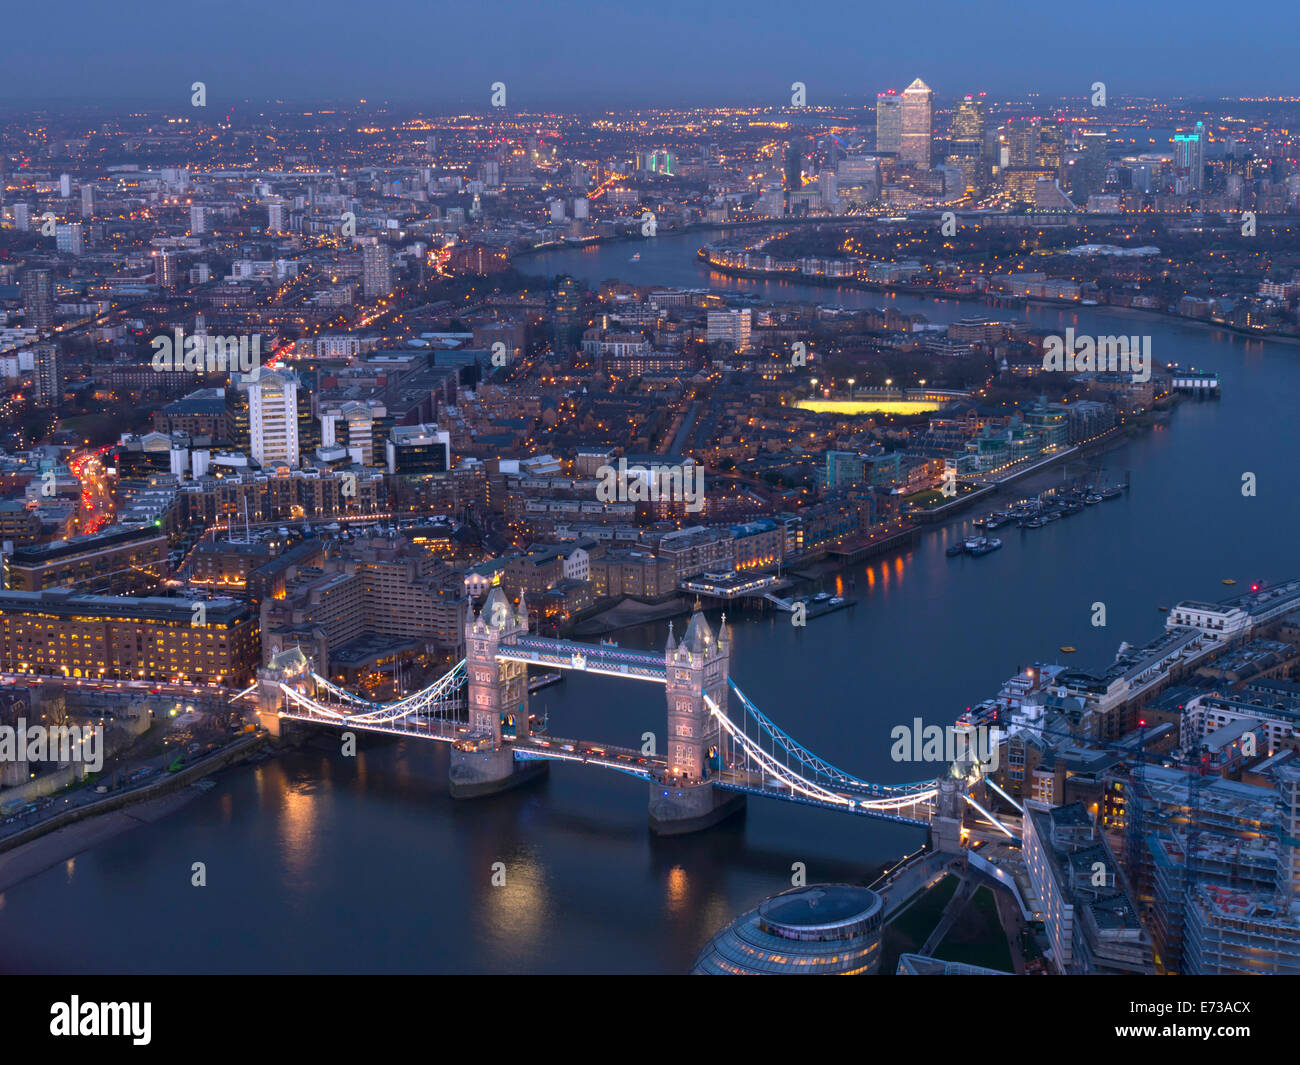 Aerial photo showing Tower Bridge, River Thames and Canary Wharf at dusk, London, England, United Kingdom, Europe Stock Photo